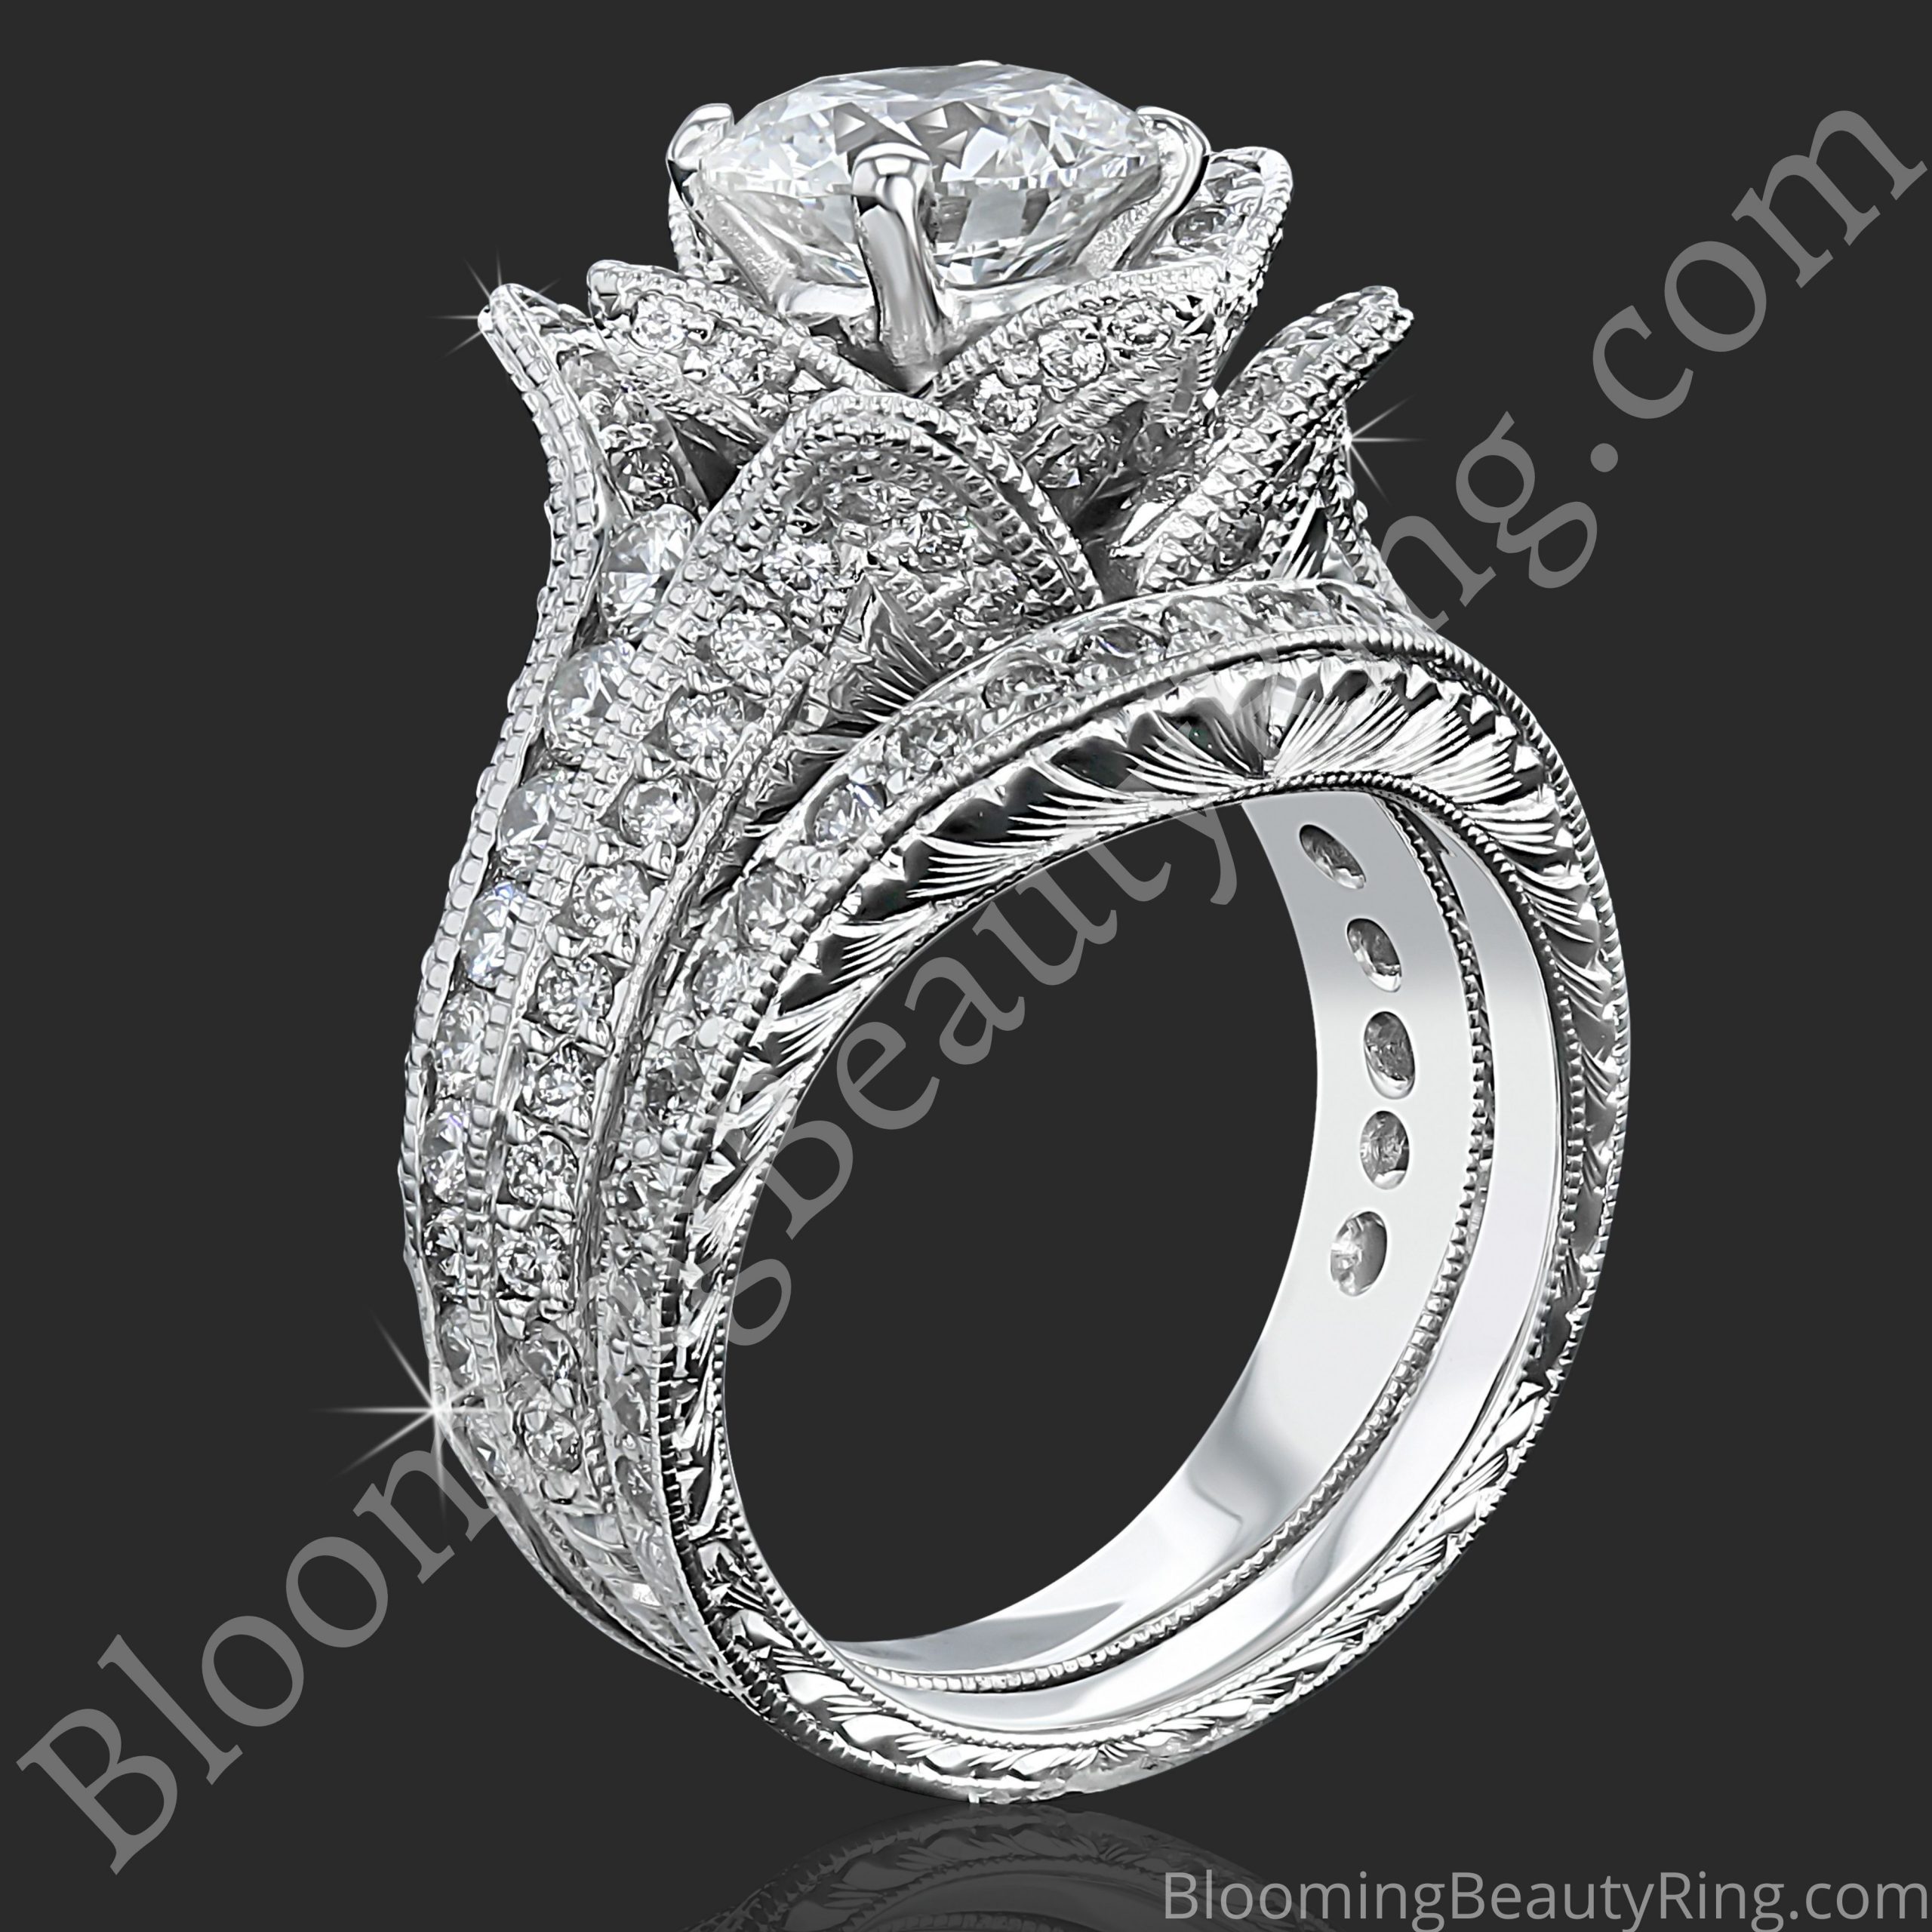 1.67 ctw. Small Hand Engraved Blooming Beauty Wedding Ring Set